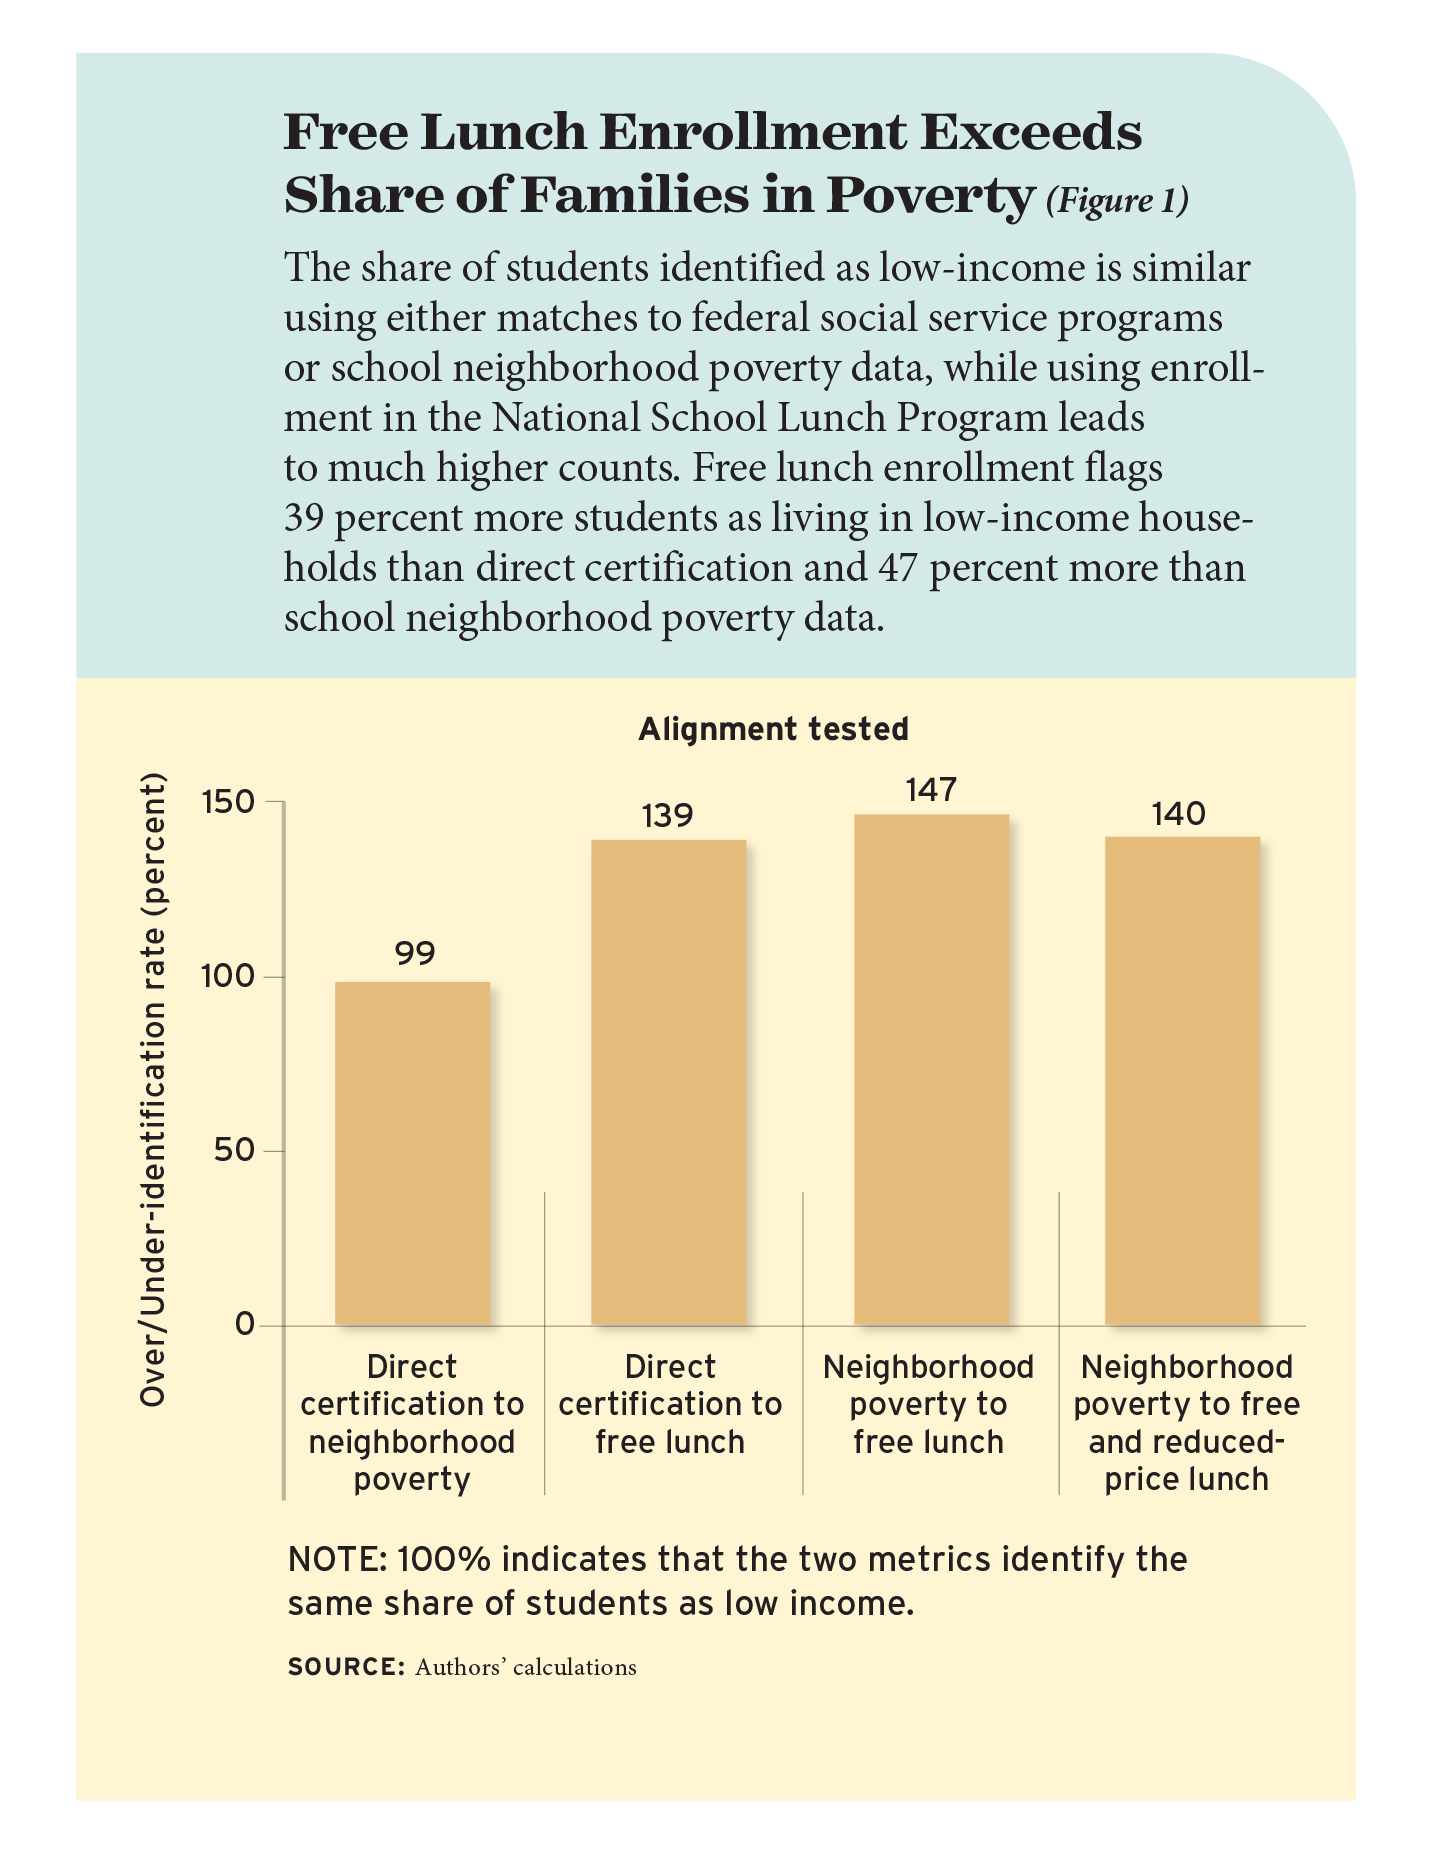 Figure 1: Free Lunch Enrollment Exceeds Share of Families in Poverty